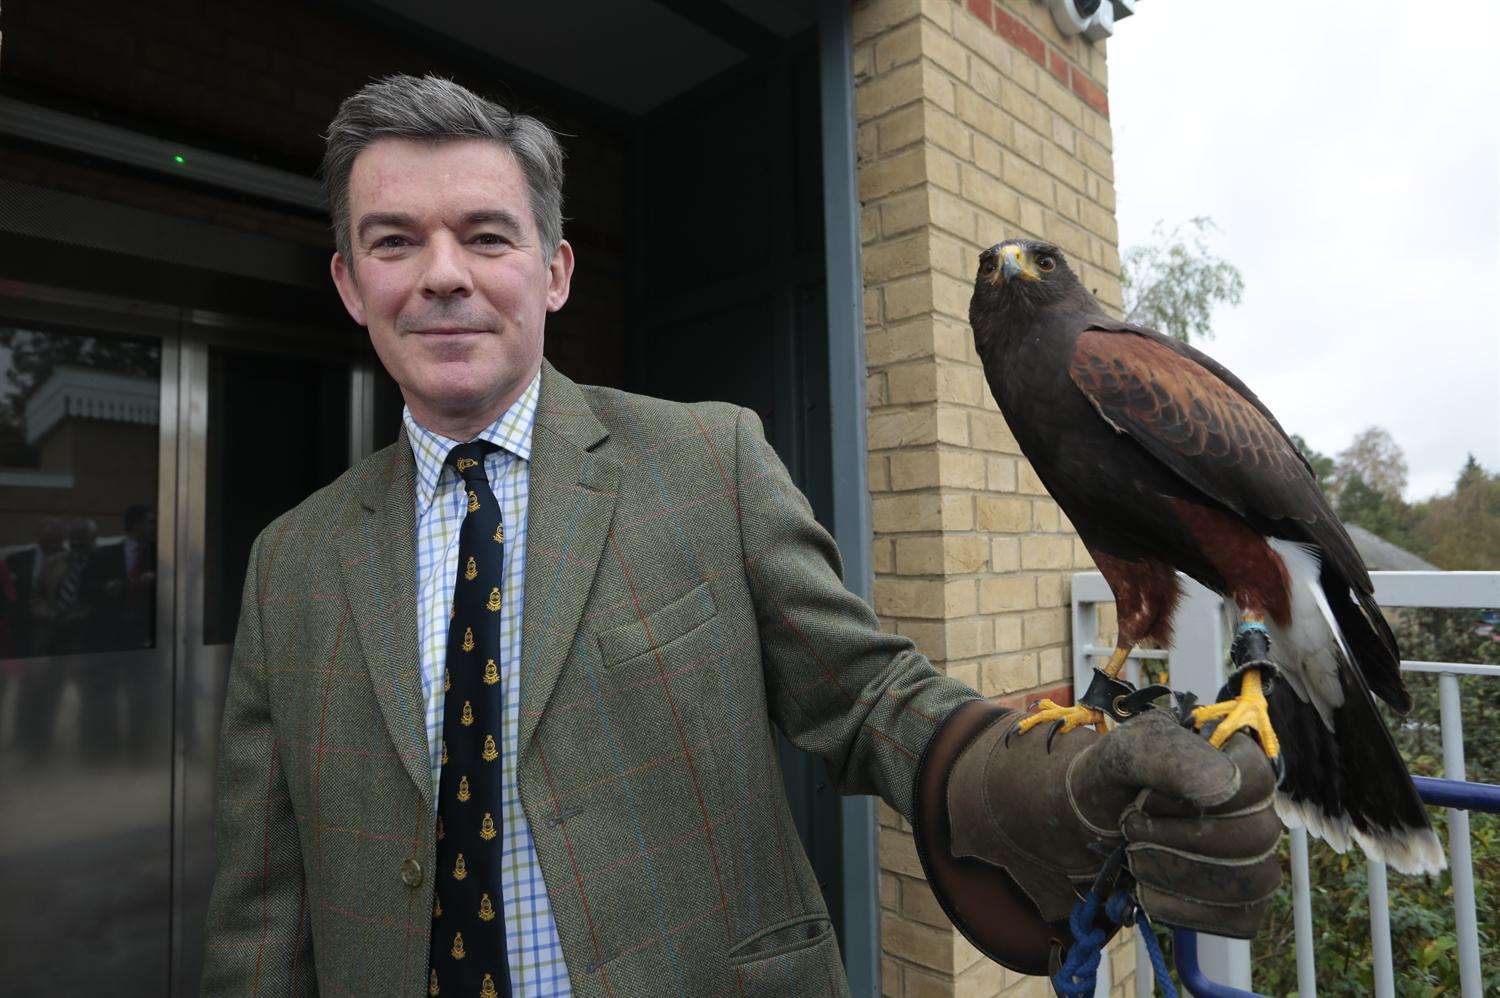 MP Hugh Robertson opens the lifts with a Harris hawk from Leeds Castle